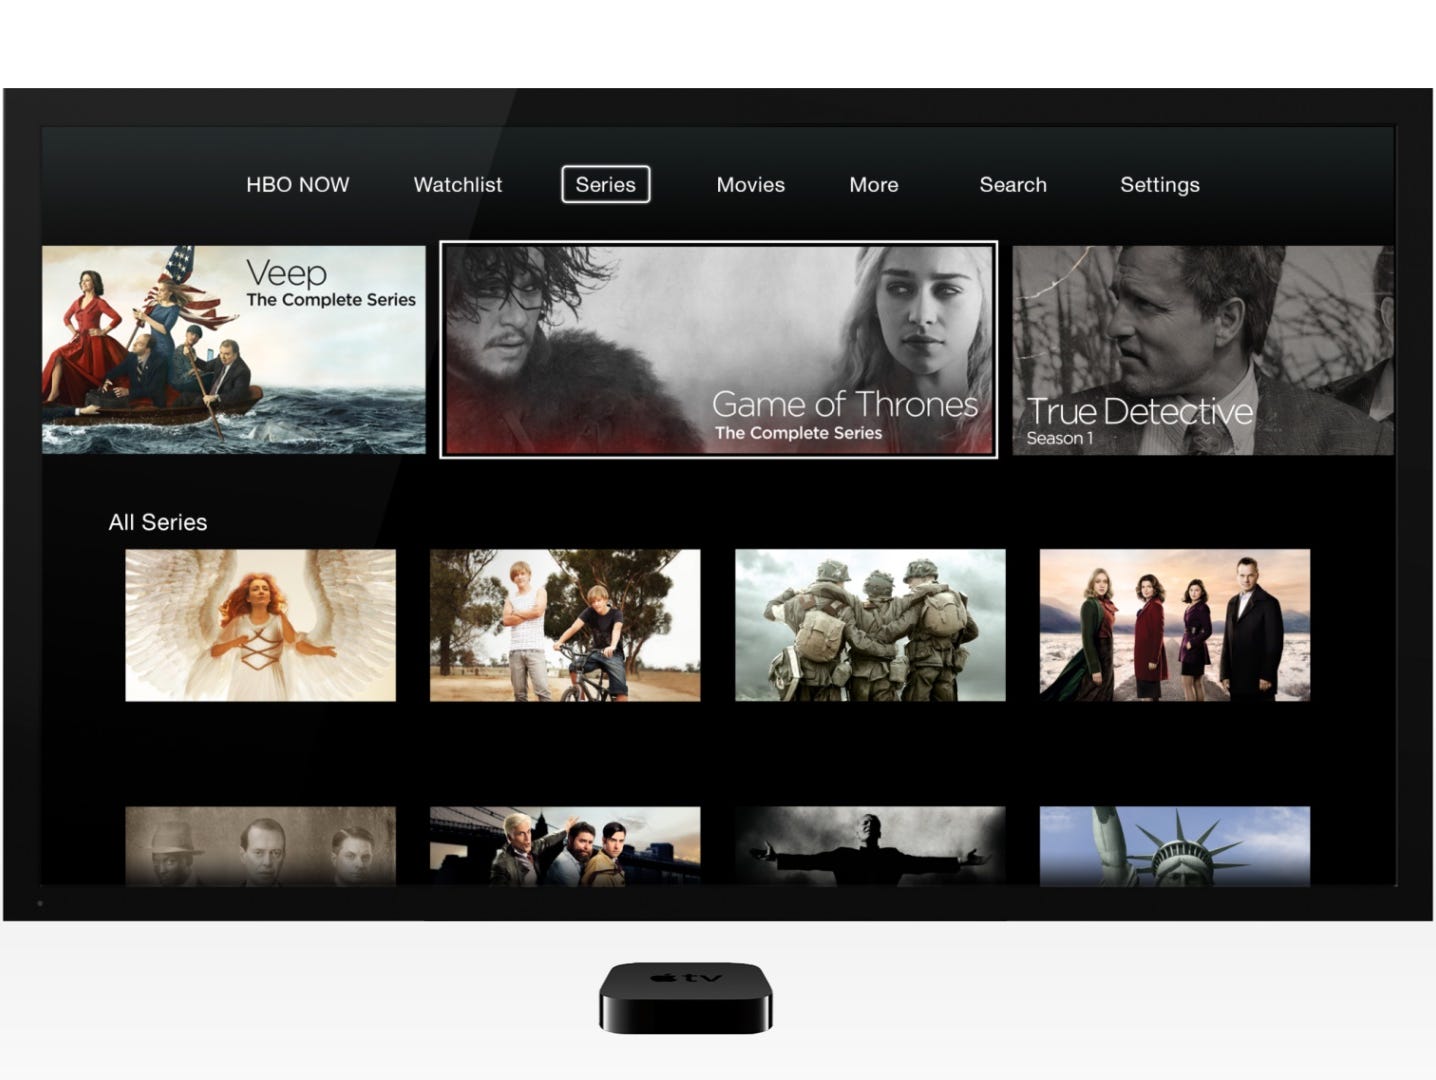 An Apple TV set-top box and TV showing HBO Now.